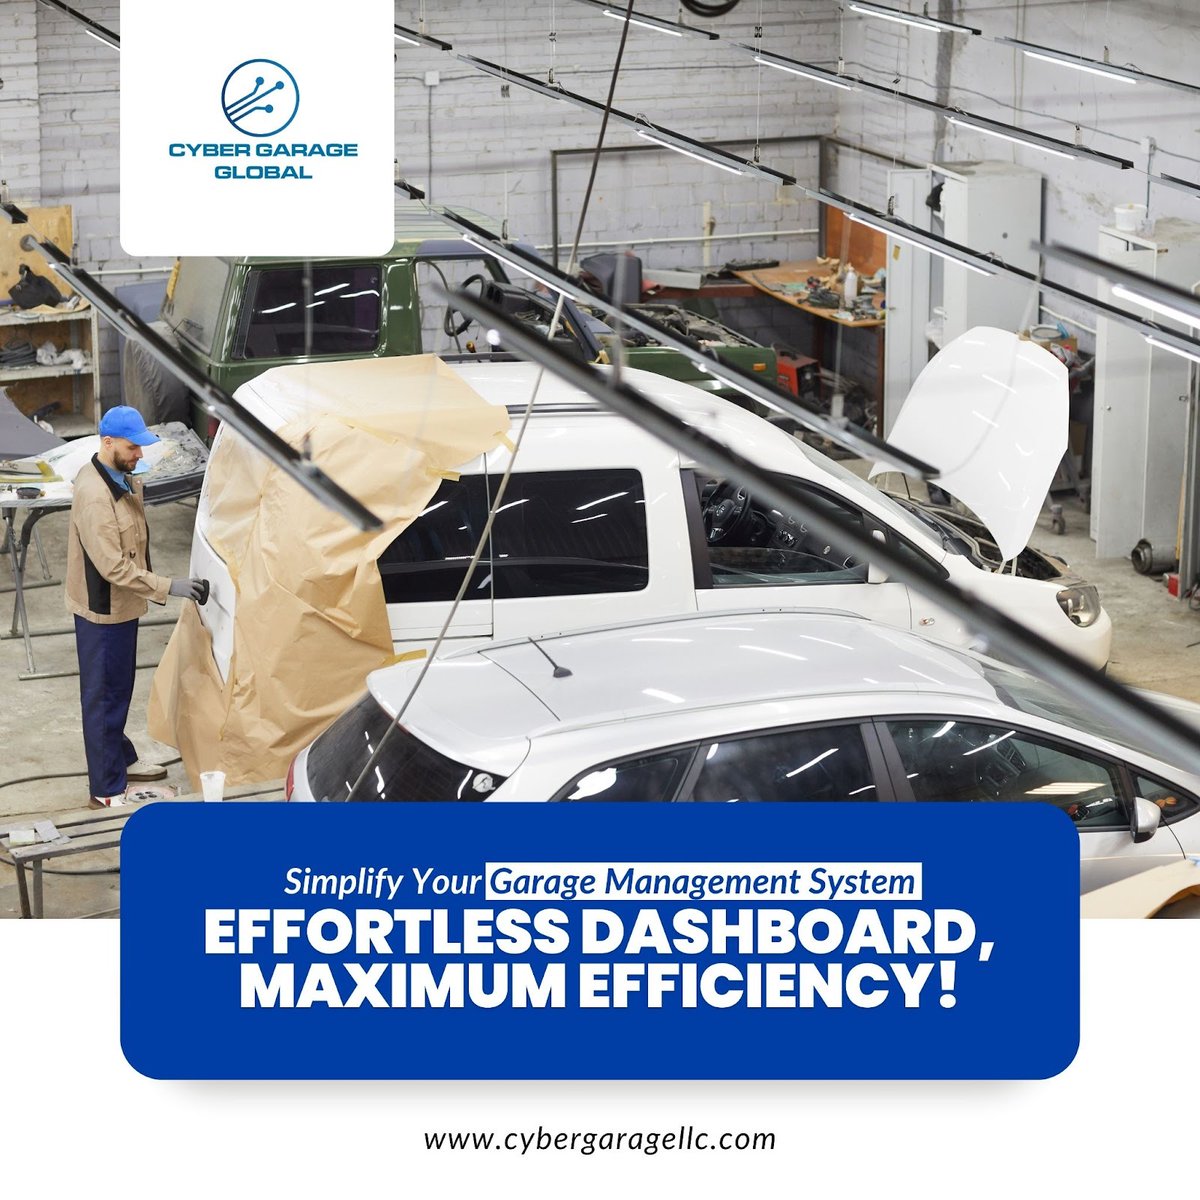 Revolutionize your garage management with our user-friendly dashboard feature! 🛠 Say goodbye to complexity and hello to seamless operations.
----
Upgrade now for a seamless garage management experience! 🛠💼  cybergaragellc.com
.
#GarageManagement #Efficiency #UserFriendly